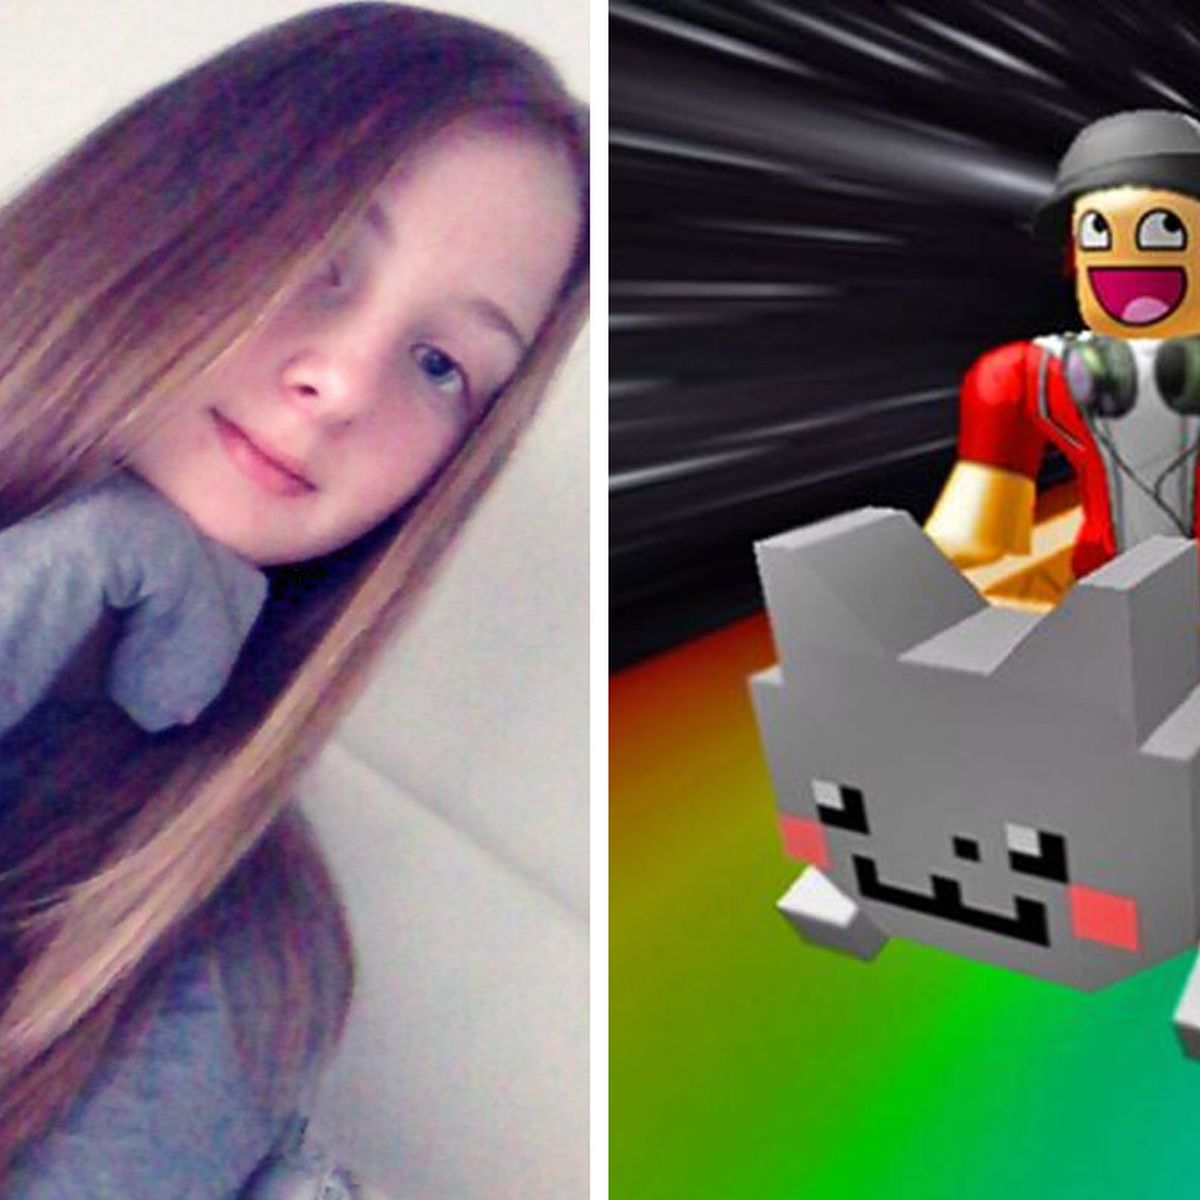 It Made Me Feel Sick Adelaide Girl 12 Targeted By Predator On Kids Game Roblox - roblox 8 year old